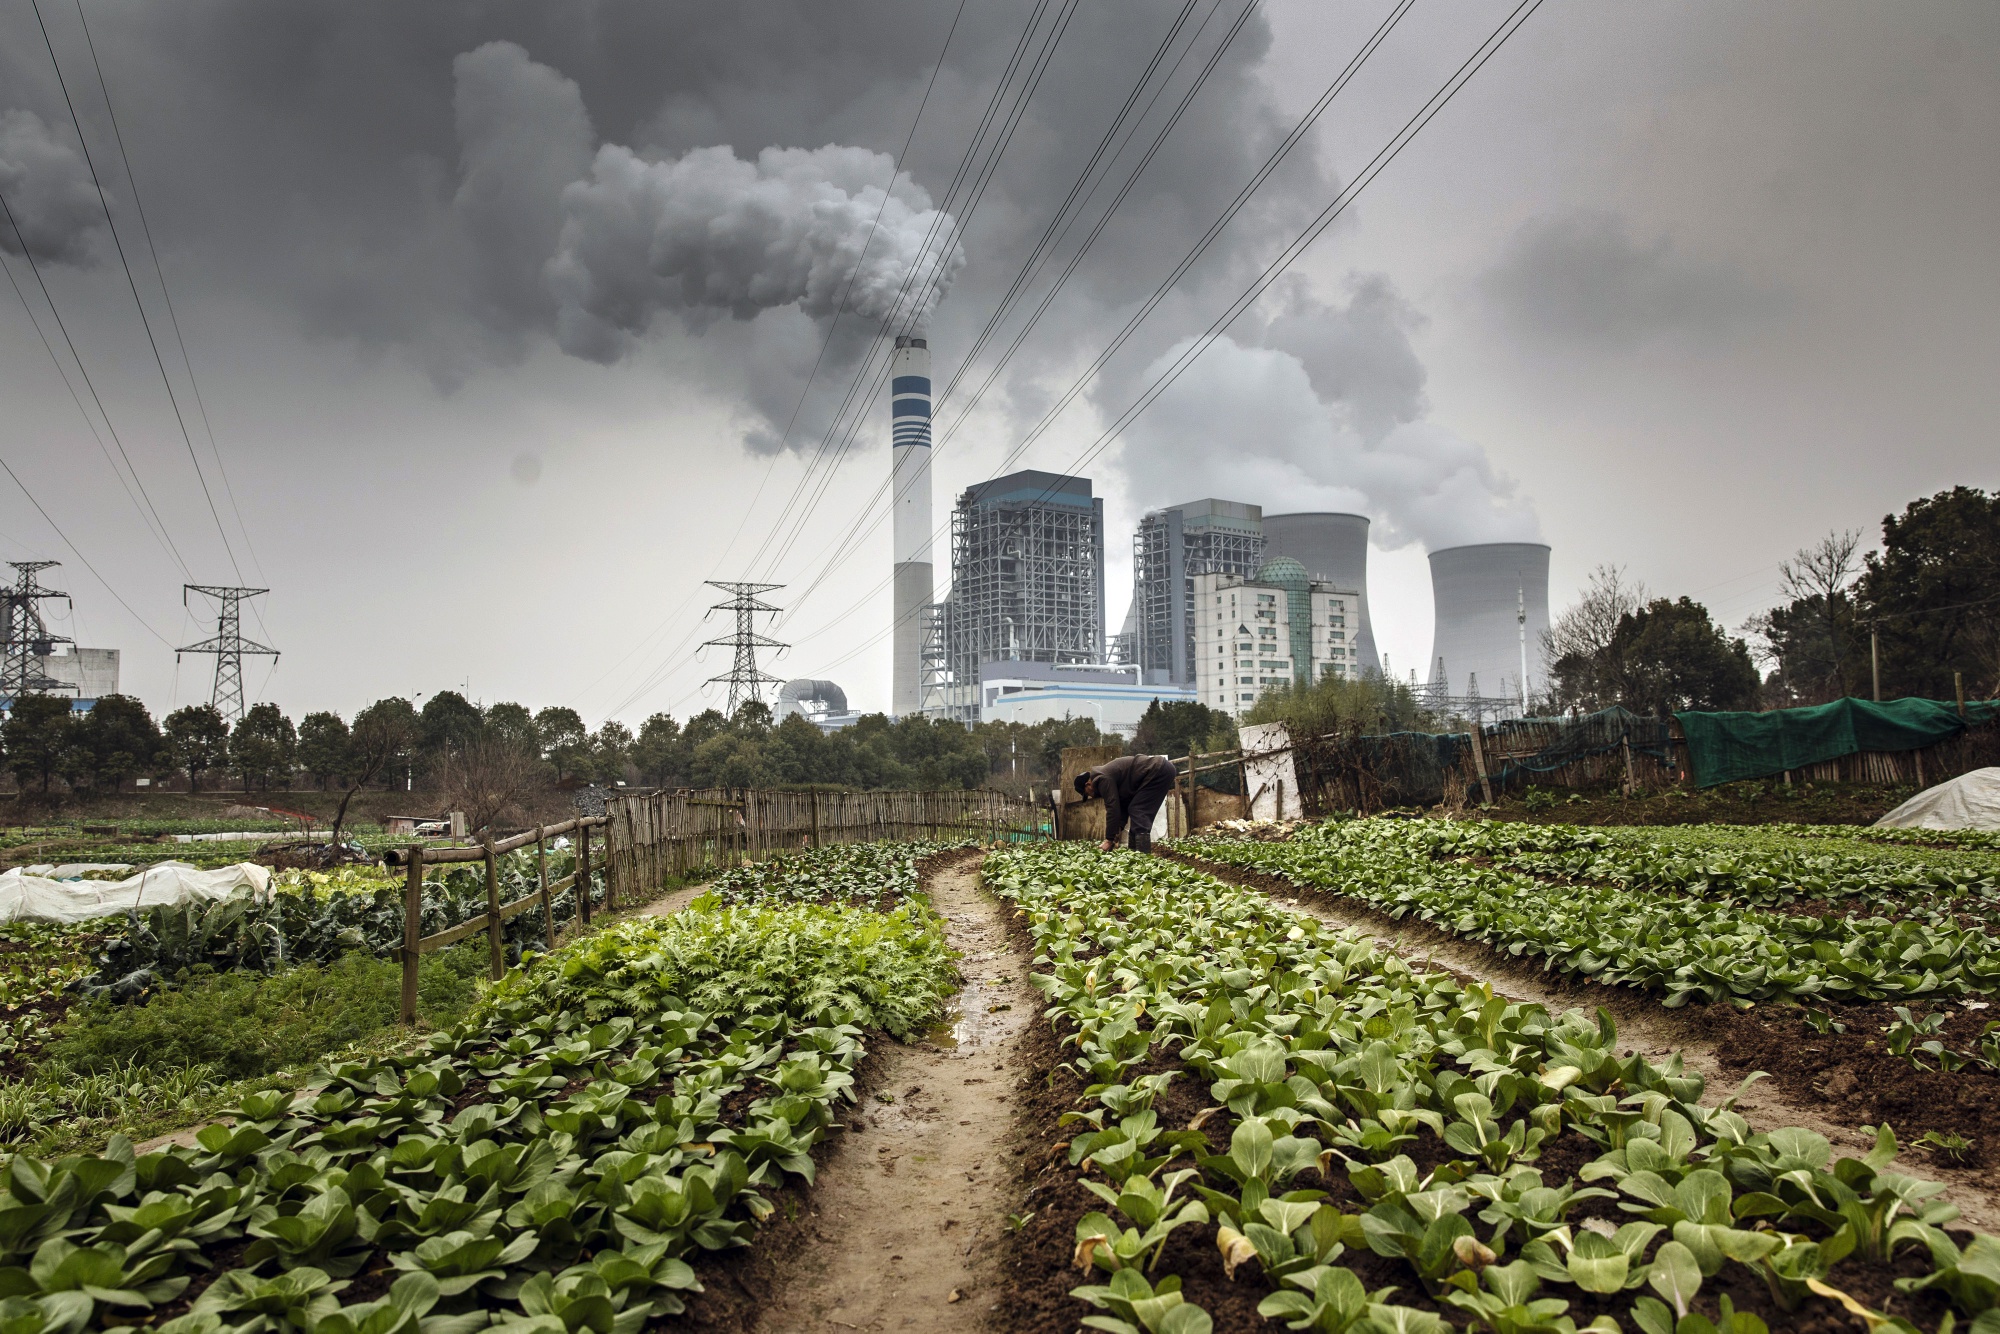 A man tends to vegetables in the shadow of a coal-fired power station in Tongling, China.